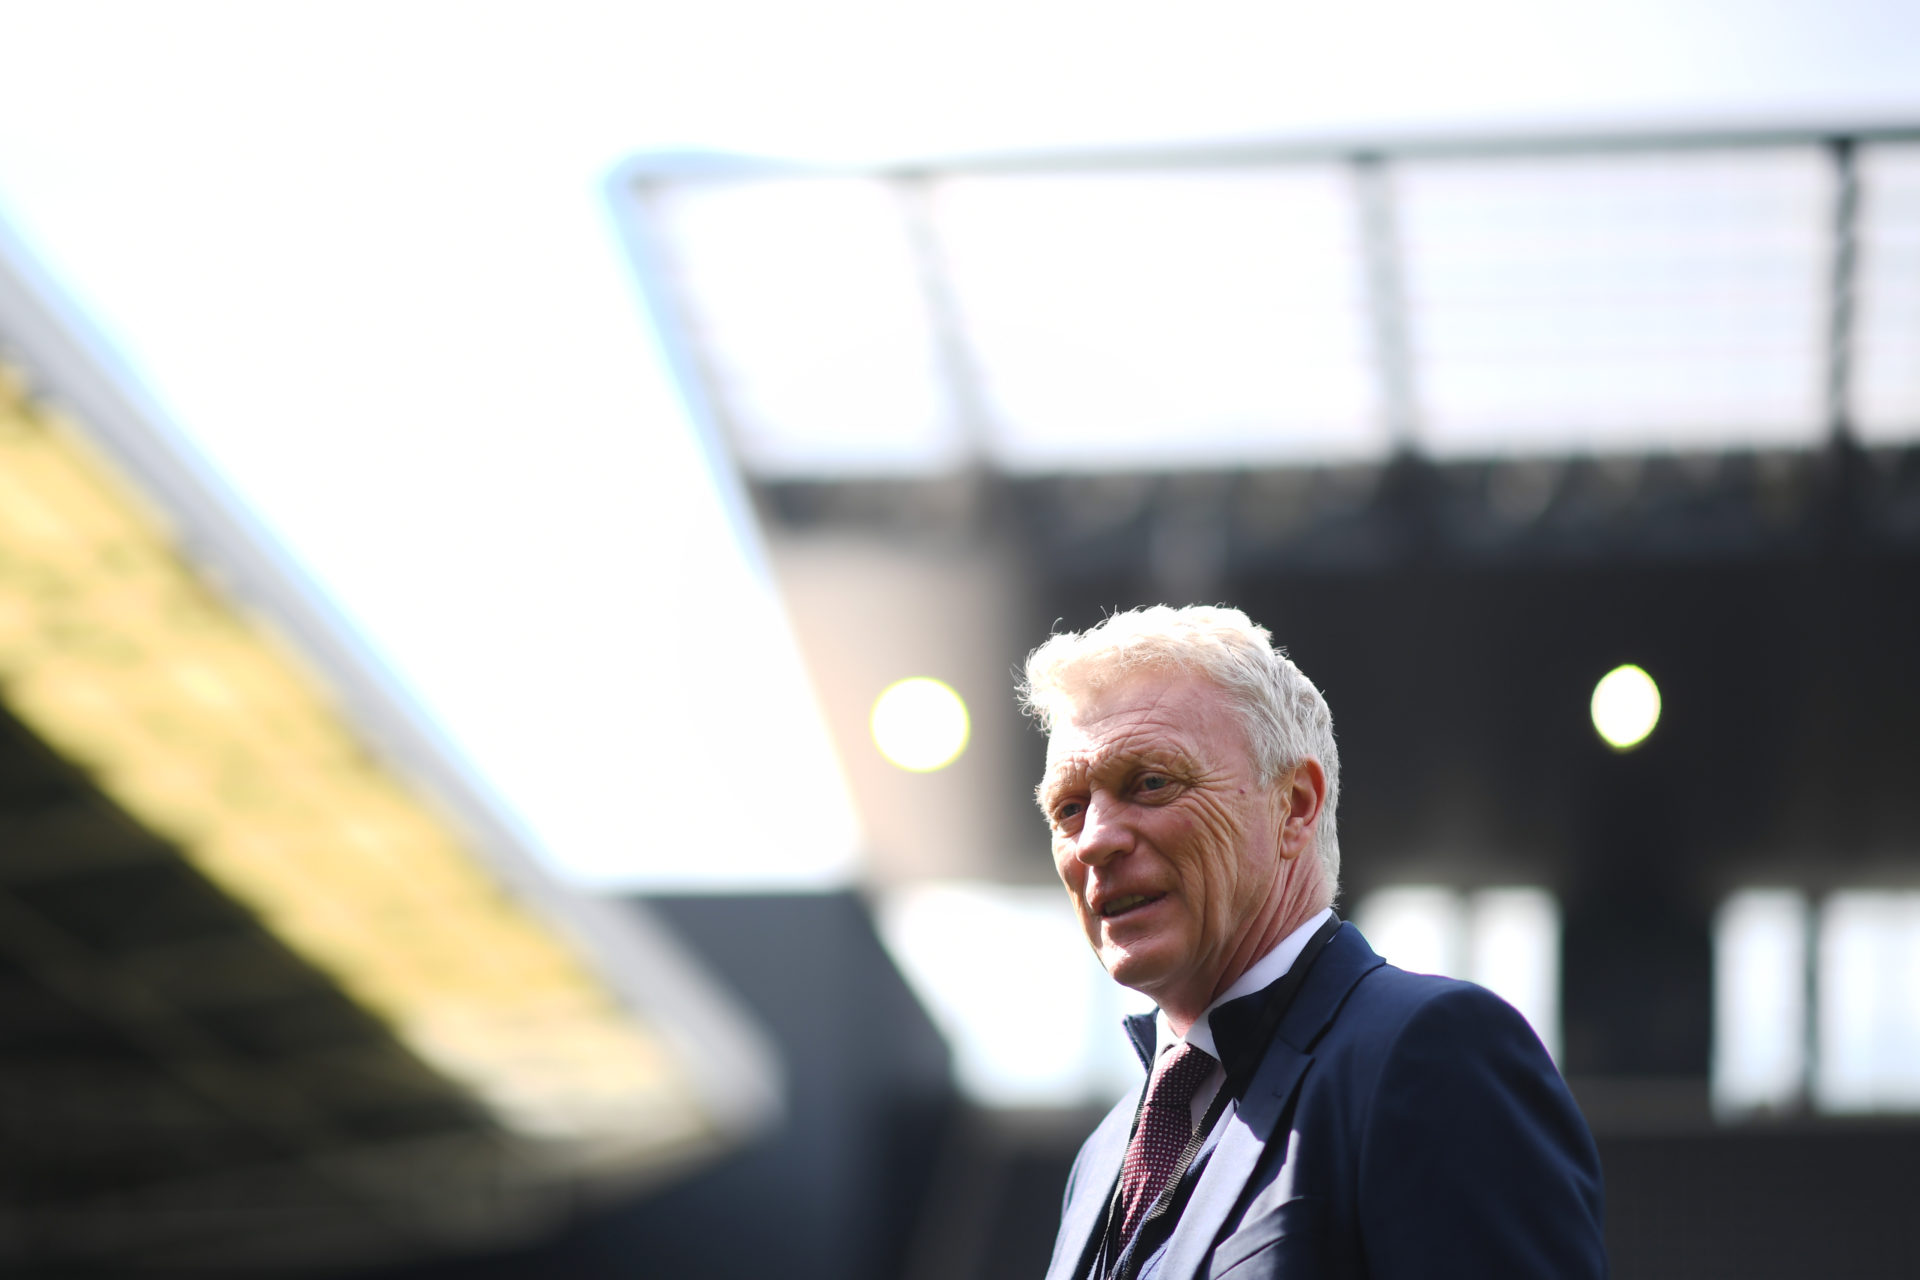 Journo with close West Ham board contacts makes big Moyes claim we’ve all been waiting for